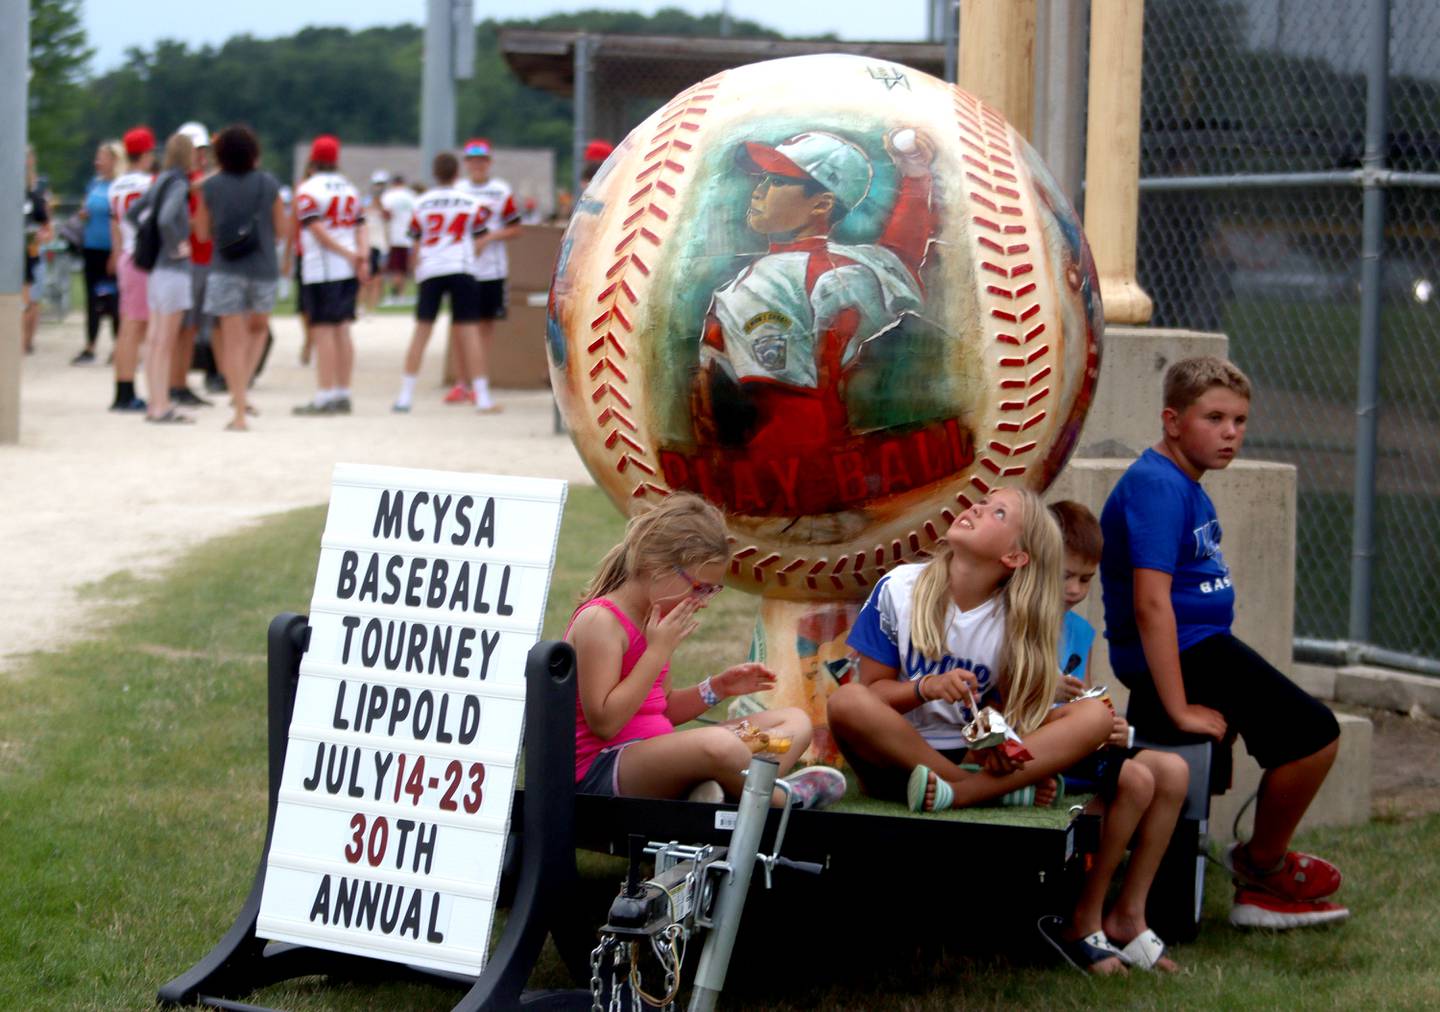 Children munch on snacks near a large baseball statue during MCYSA 2023 Summer International Championships Opening Ceremonies Friday, July 14, 2023, at the Mickey Sund Complex in Lippold Park in Crystal Lake.